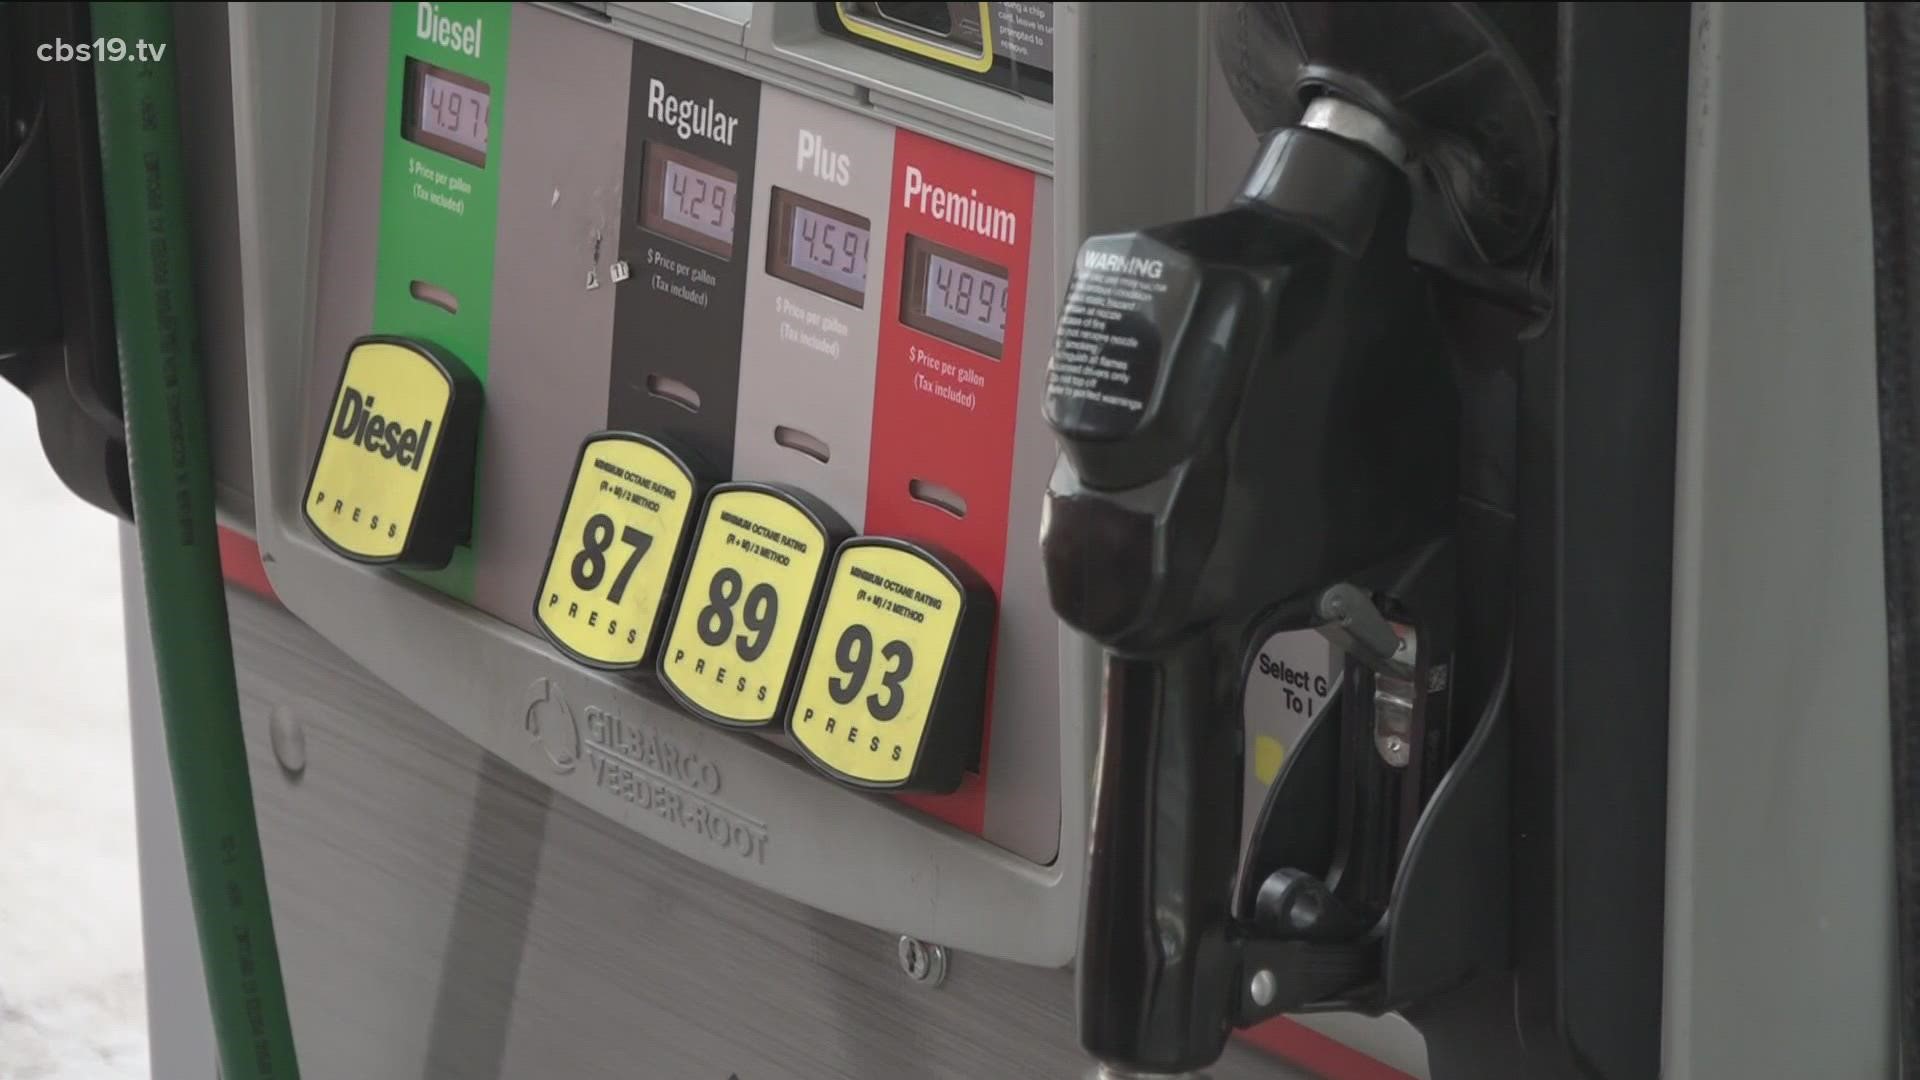 Summer could see more rising gas prices